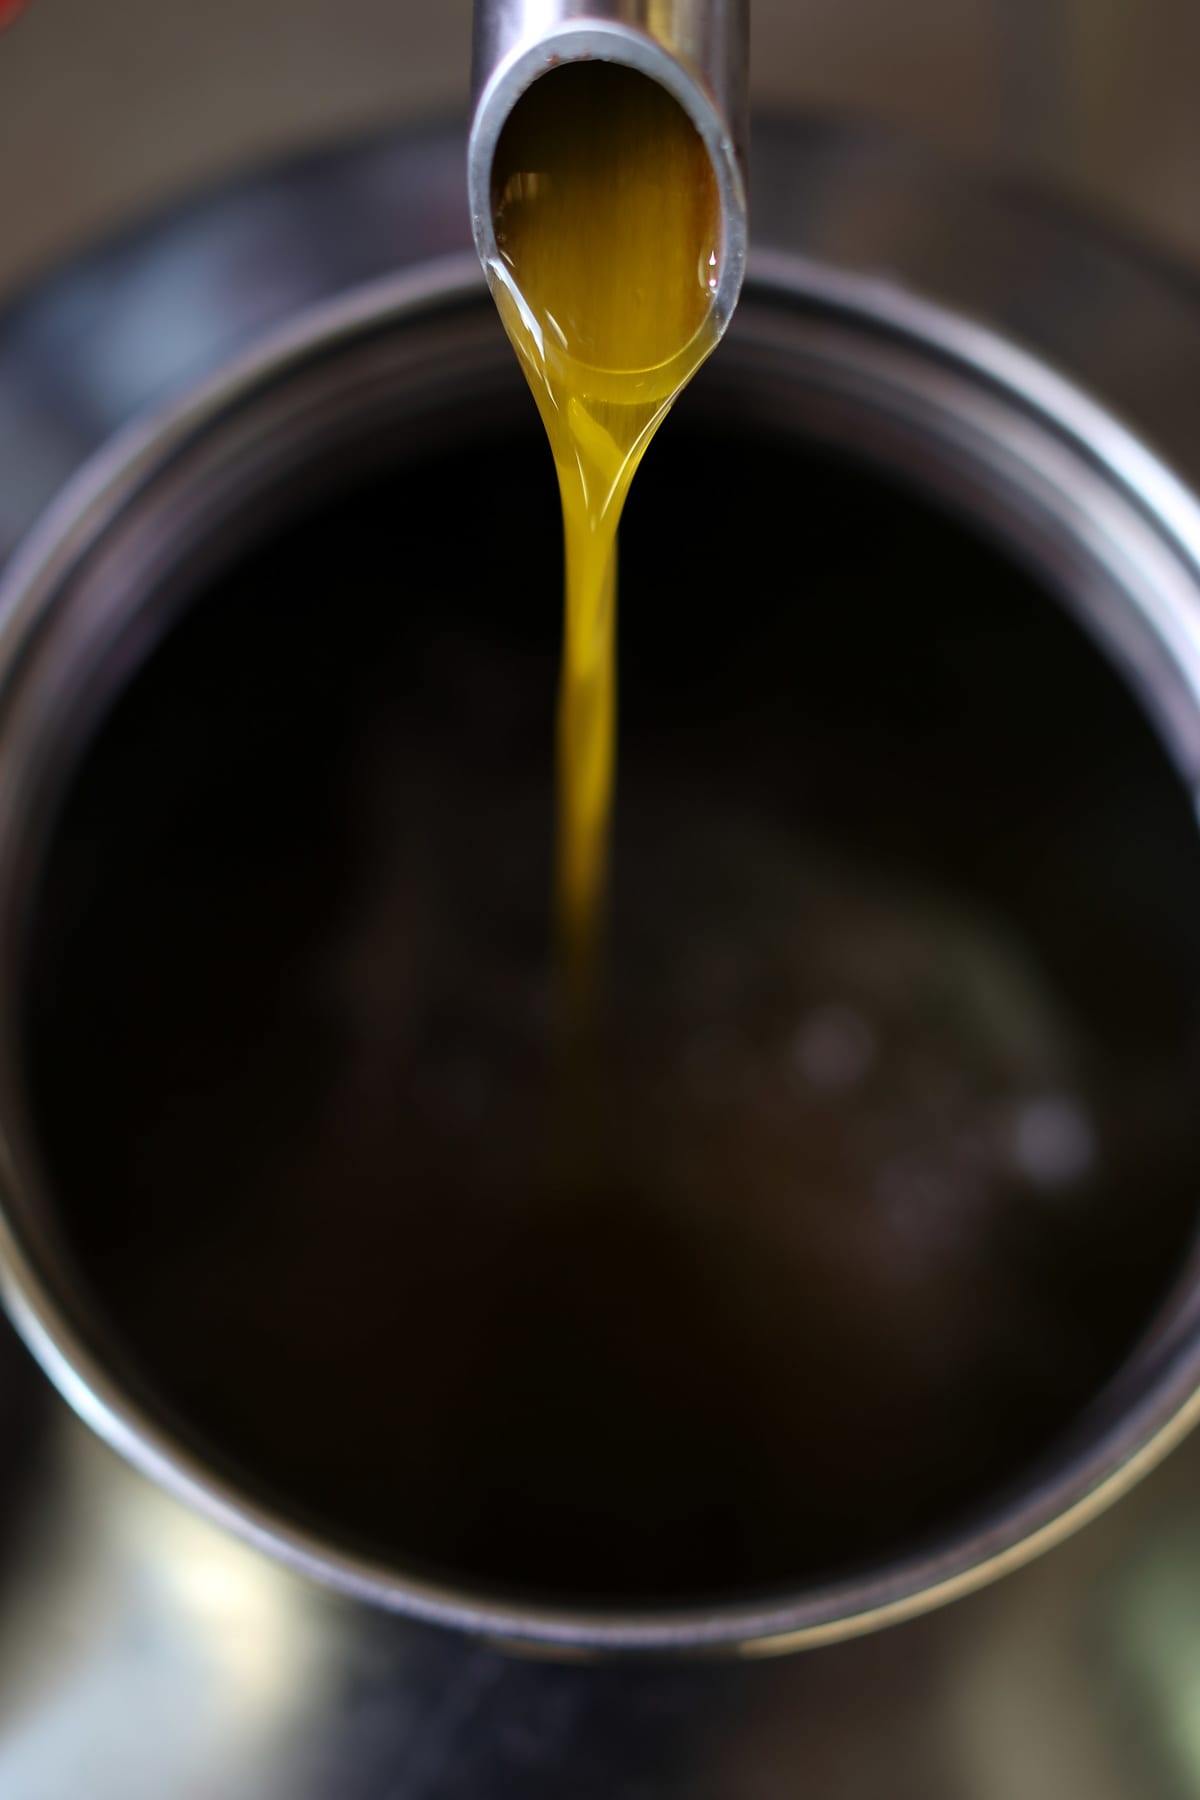 Processed olive oil pouring from a spout